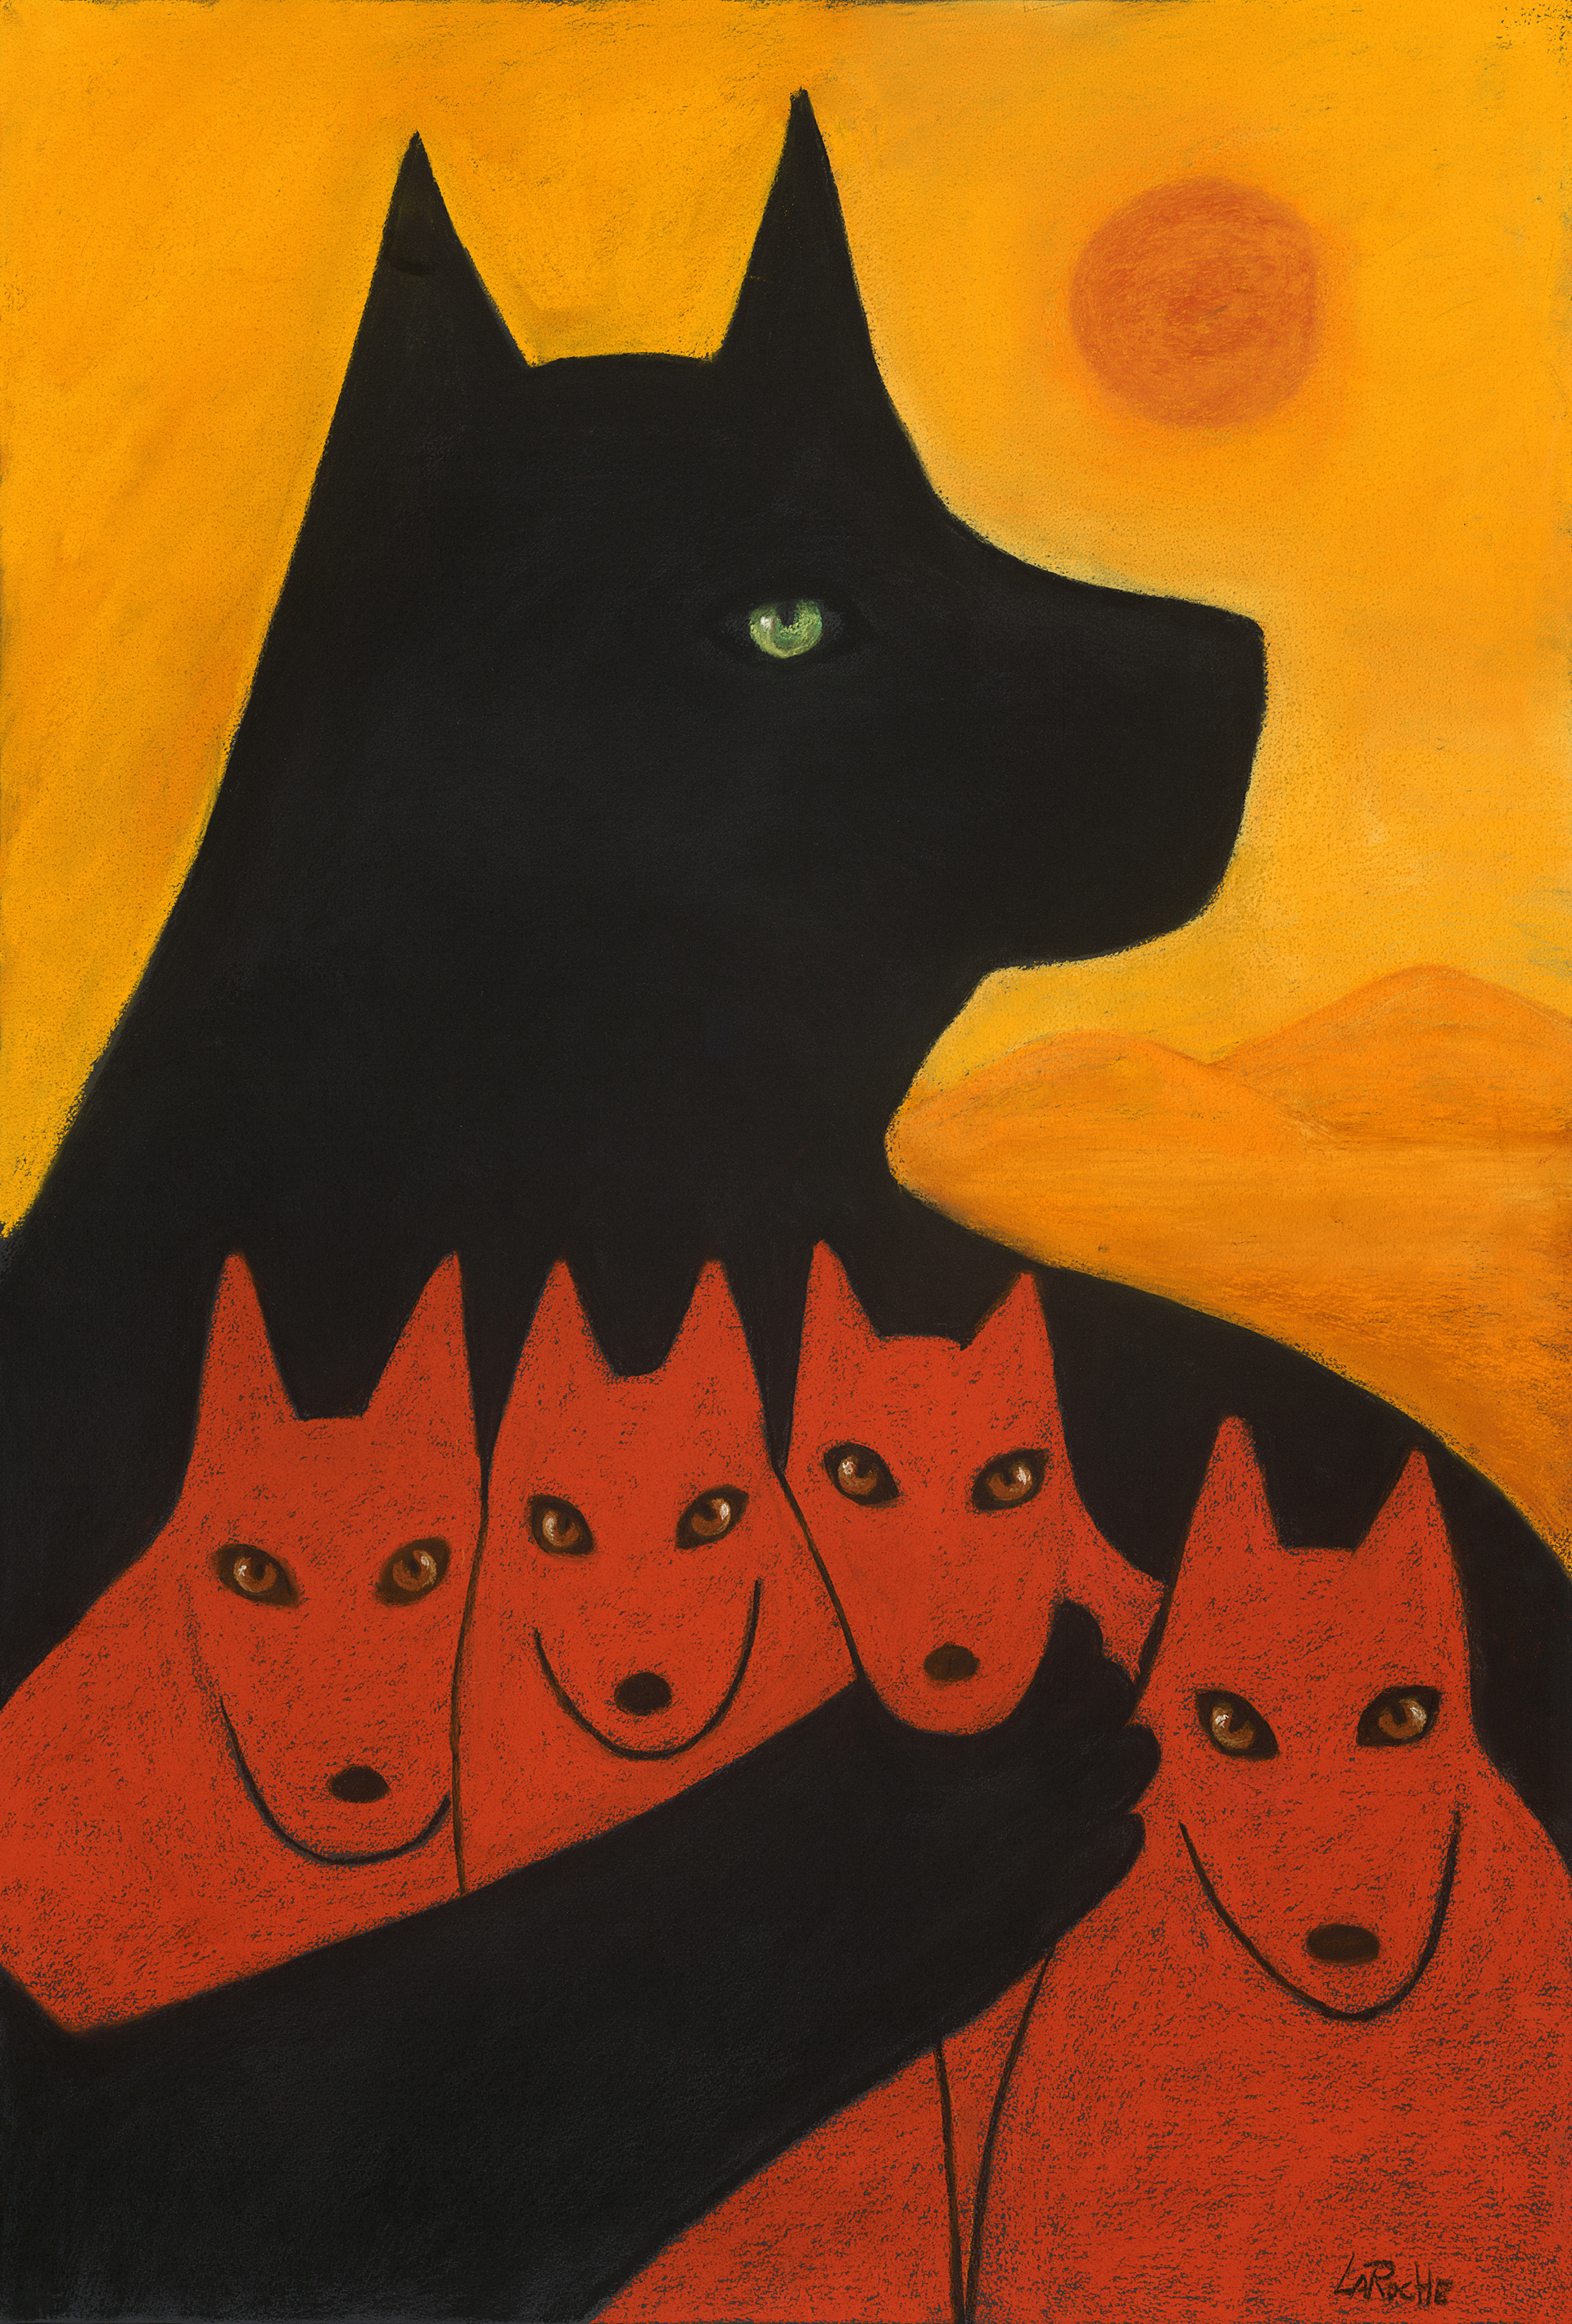 PROTECTOR WITH PUPS - limited edition giclee on canvas (large) 44"x30" $3700 or (medium) 38"x26" $2400 or on paper w/frame size of: (large) 50"x37" $3700 or (medium) 38"x26" $2400 by Carole LaRoche